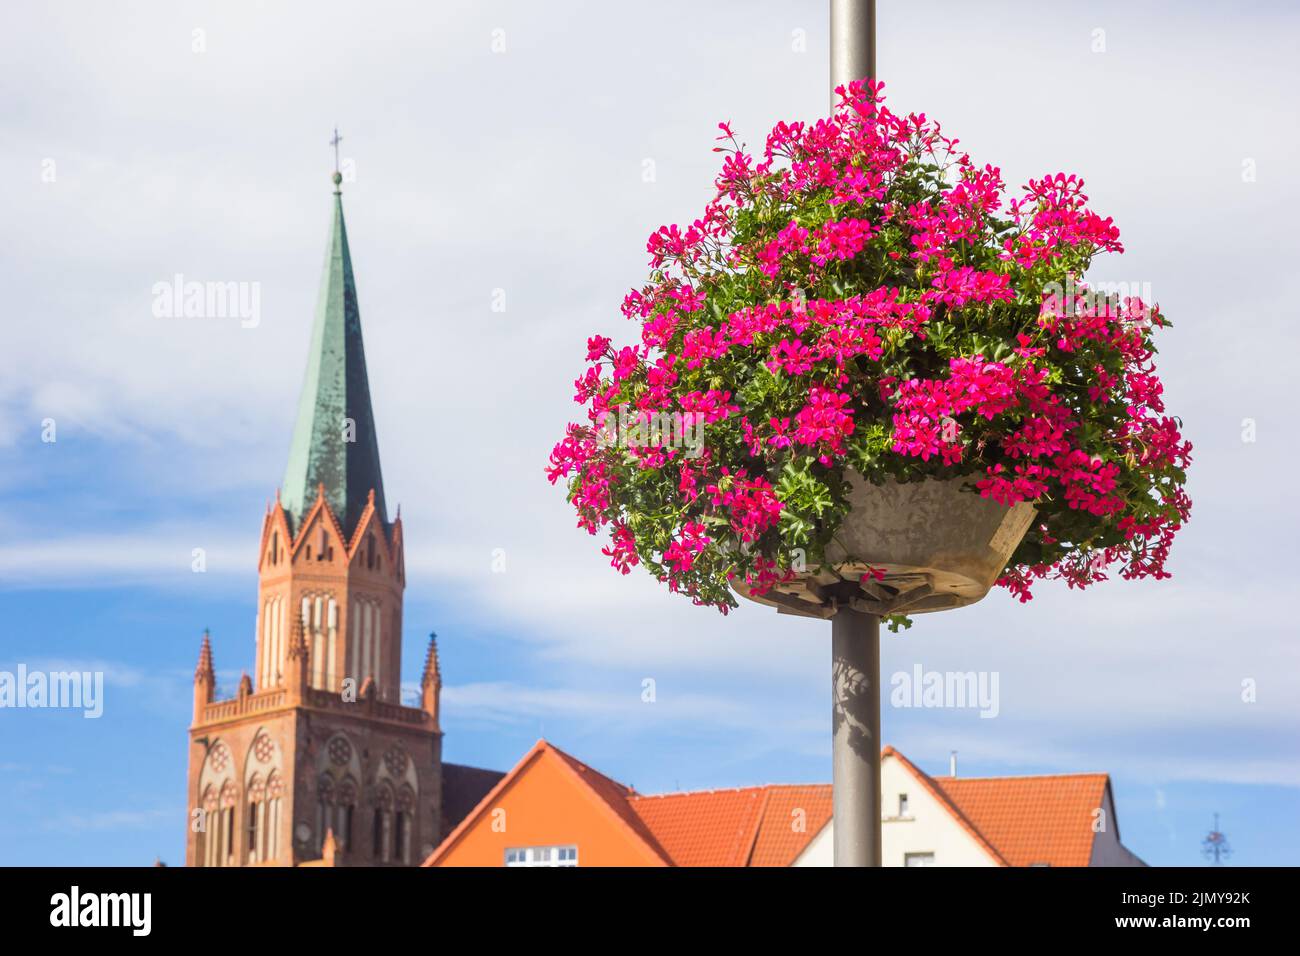 Pink flowers in front of the historic church of Trzebiatow, Poland Stock Photo